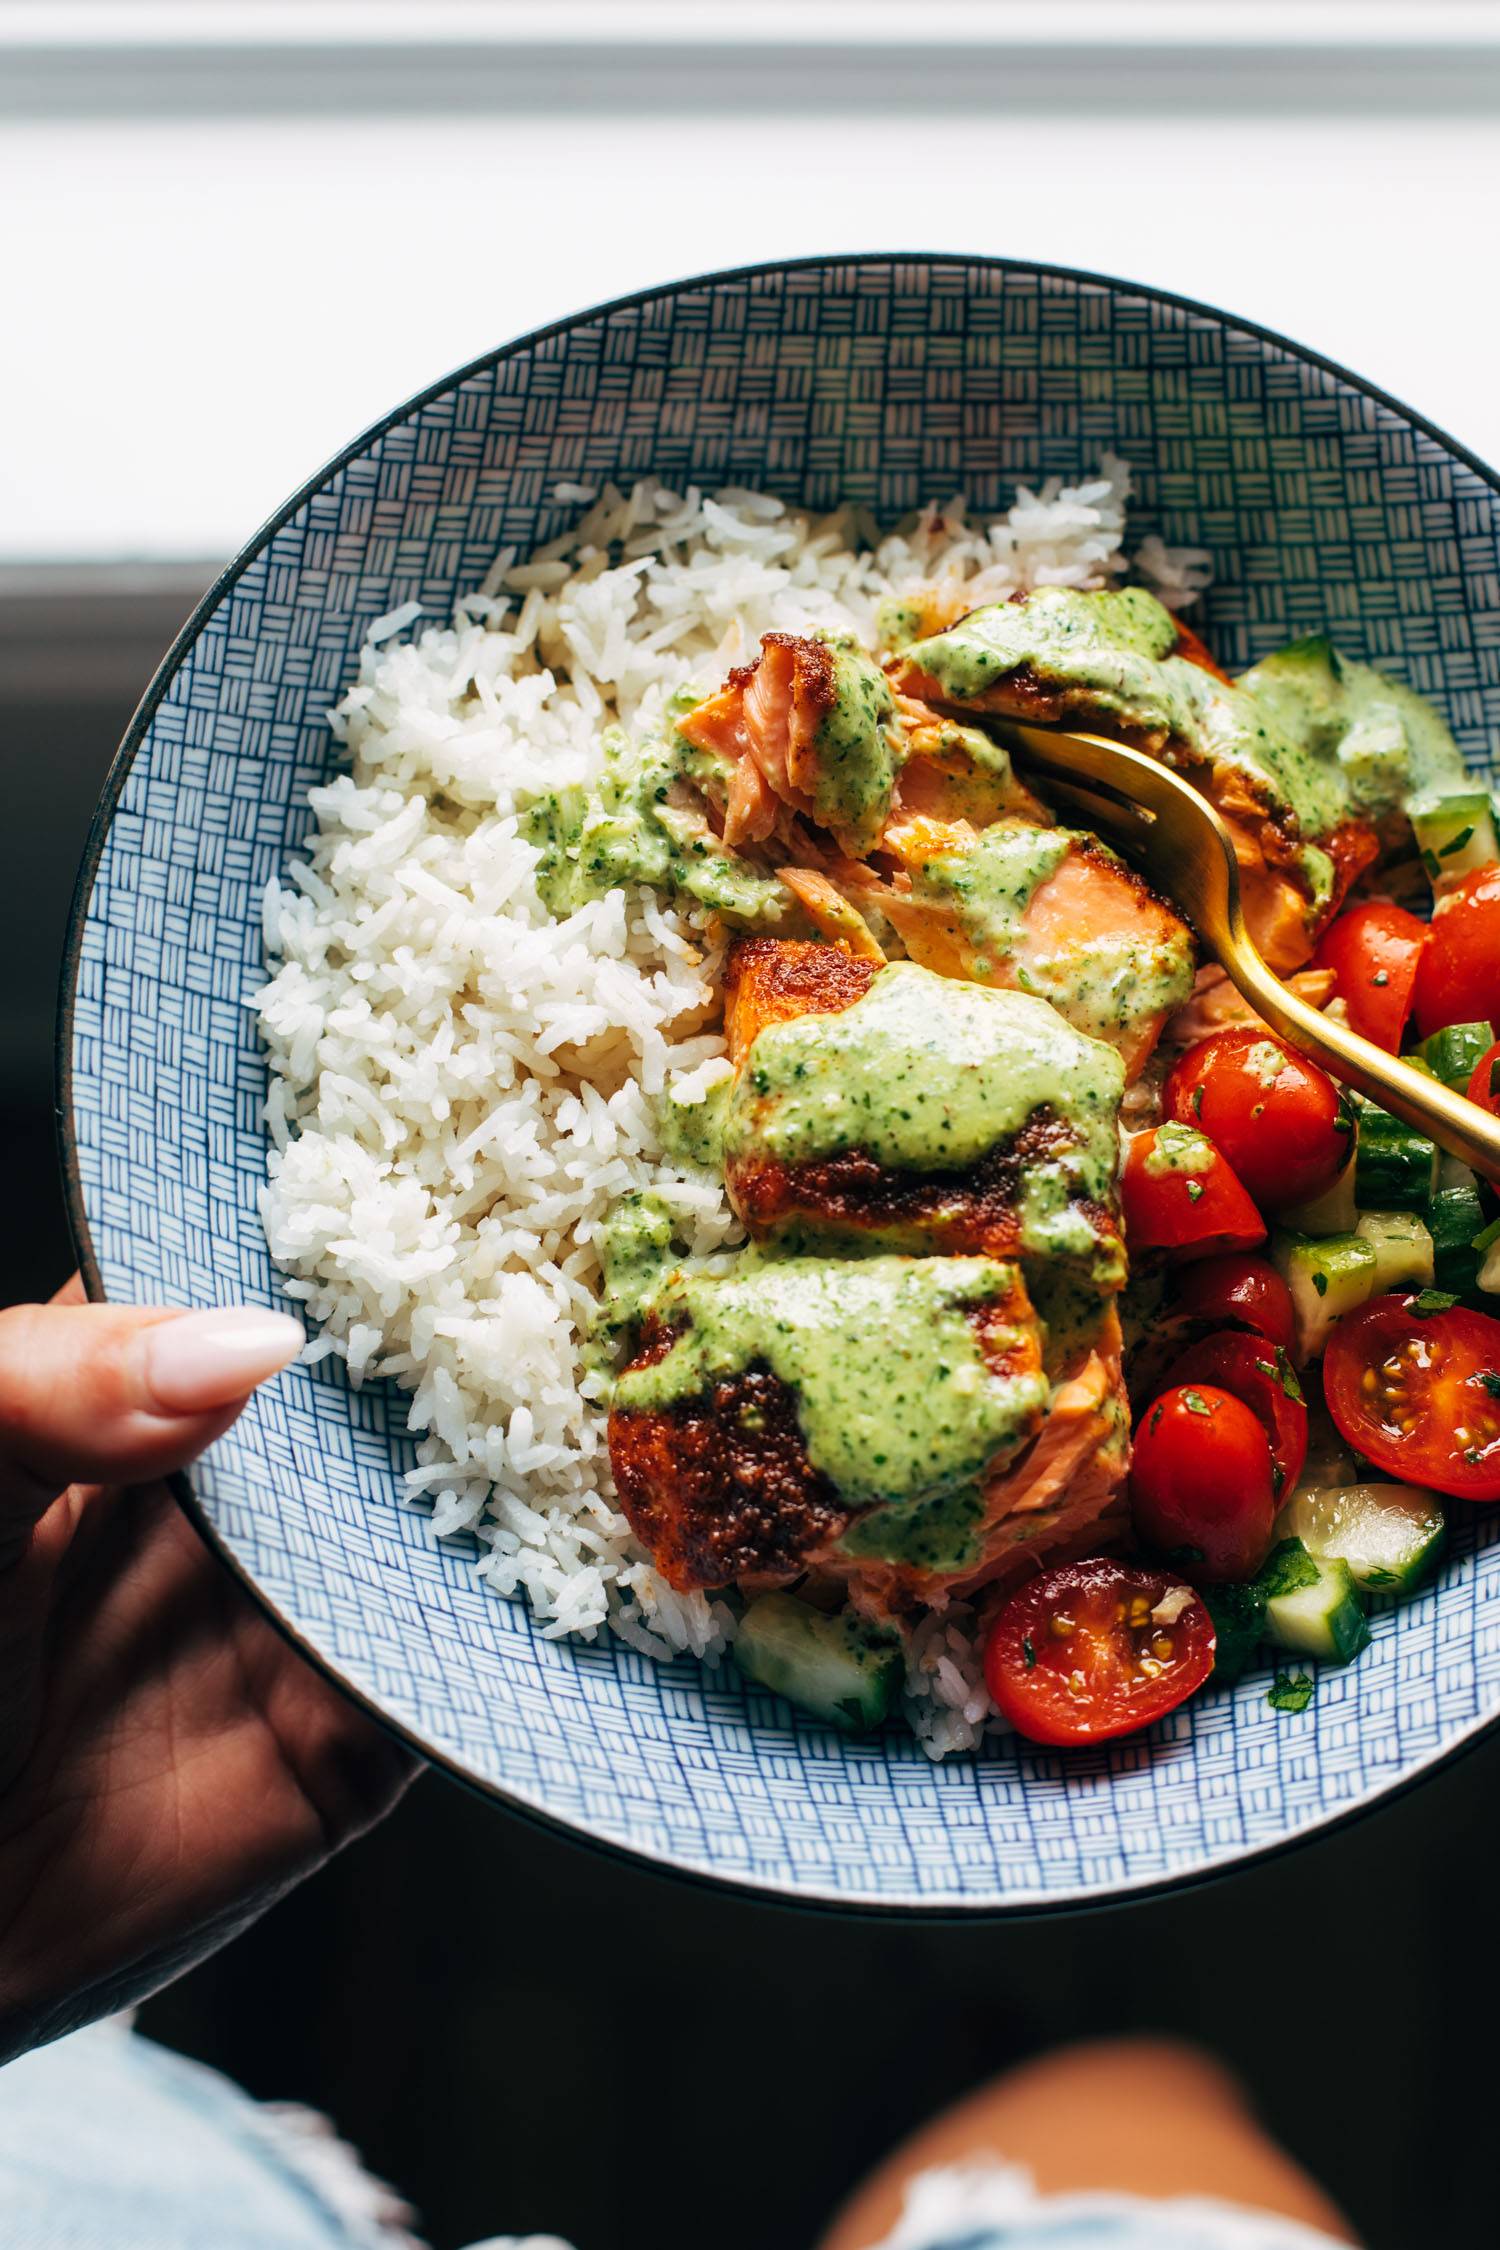 Salmon with basil sauce, tomato salad, and rice in a bowl